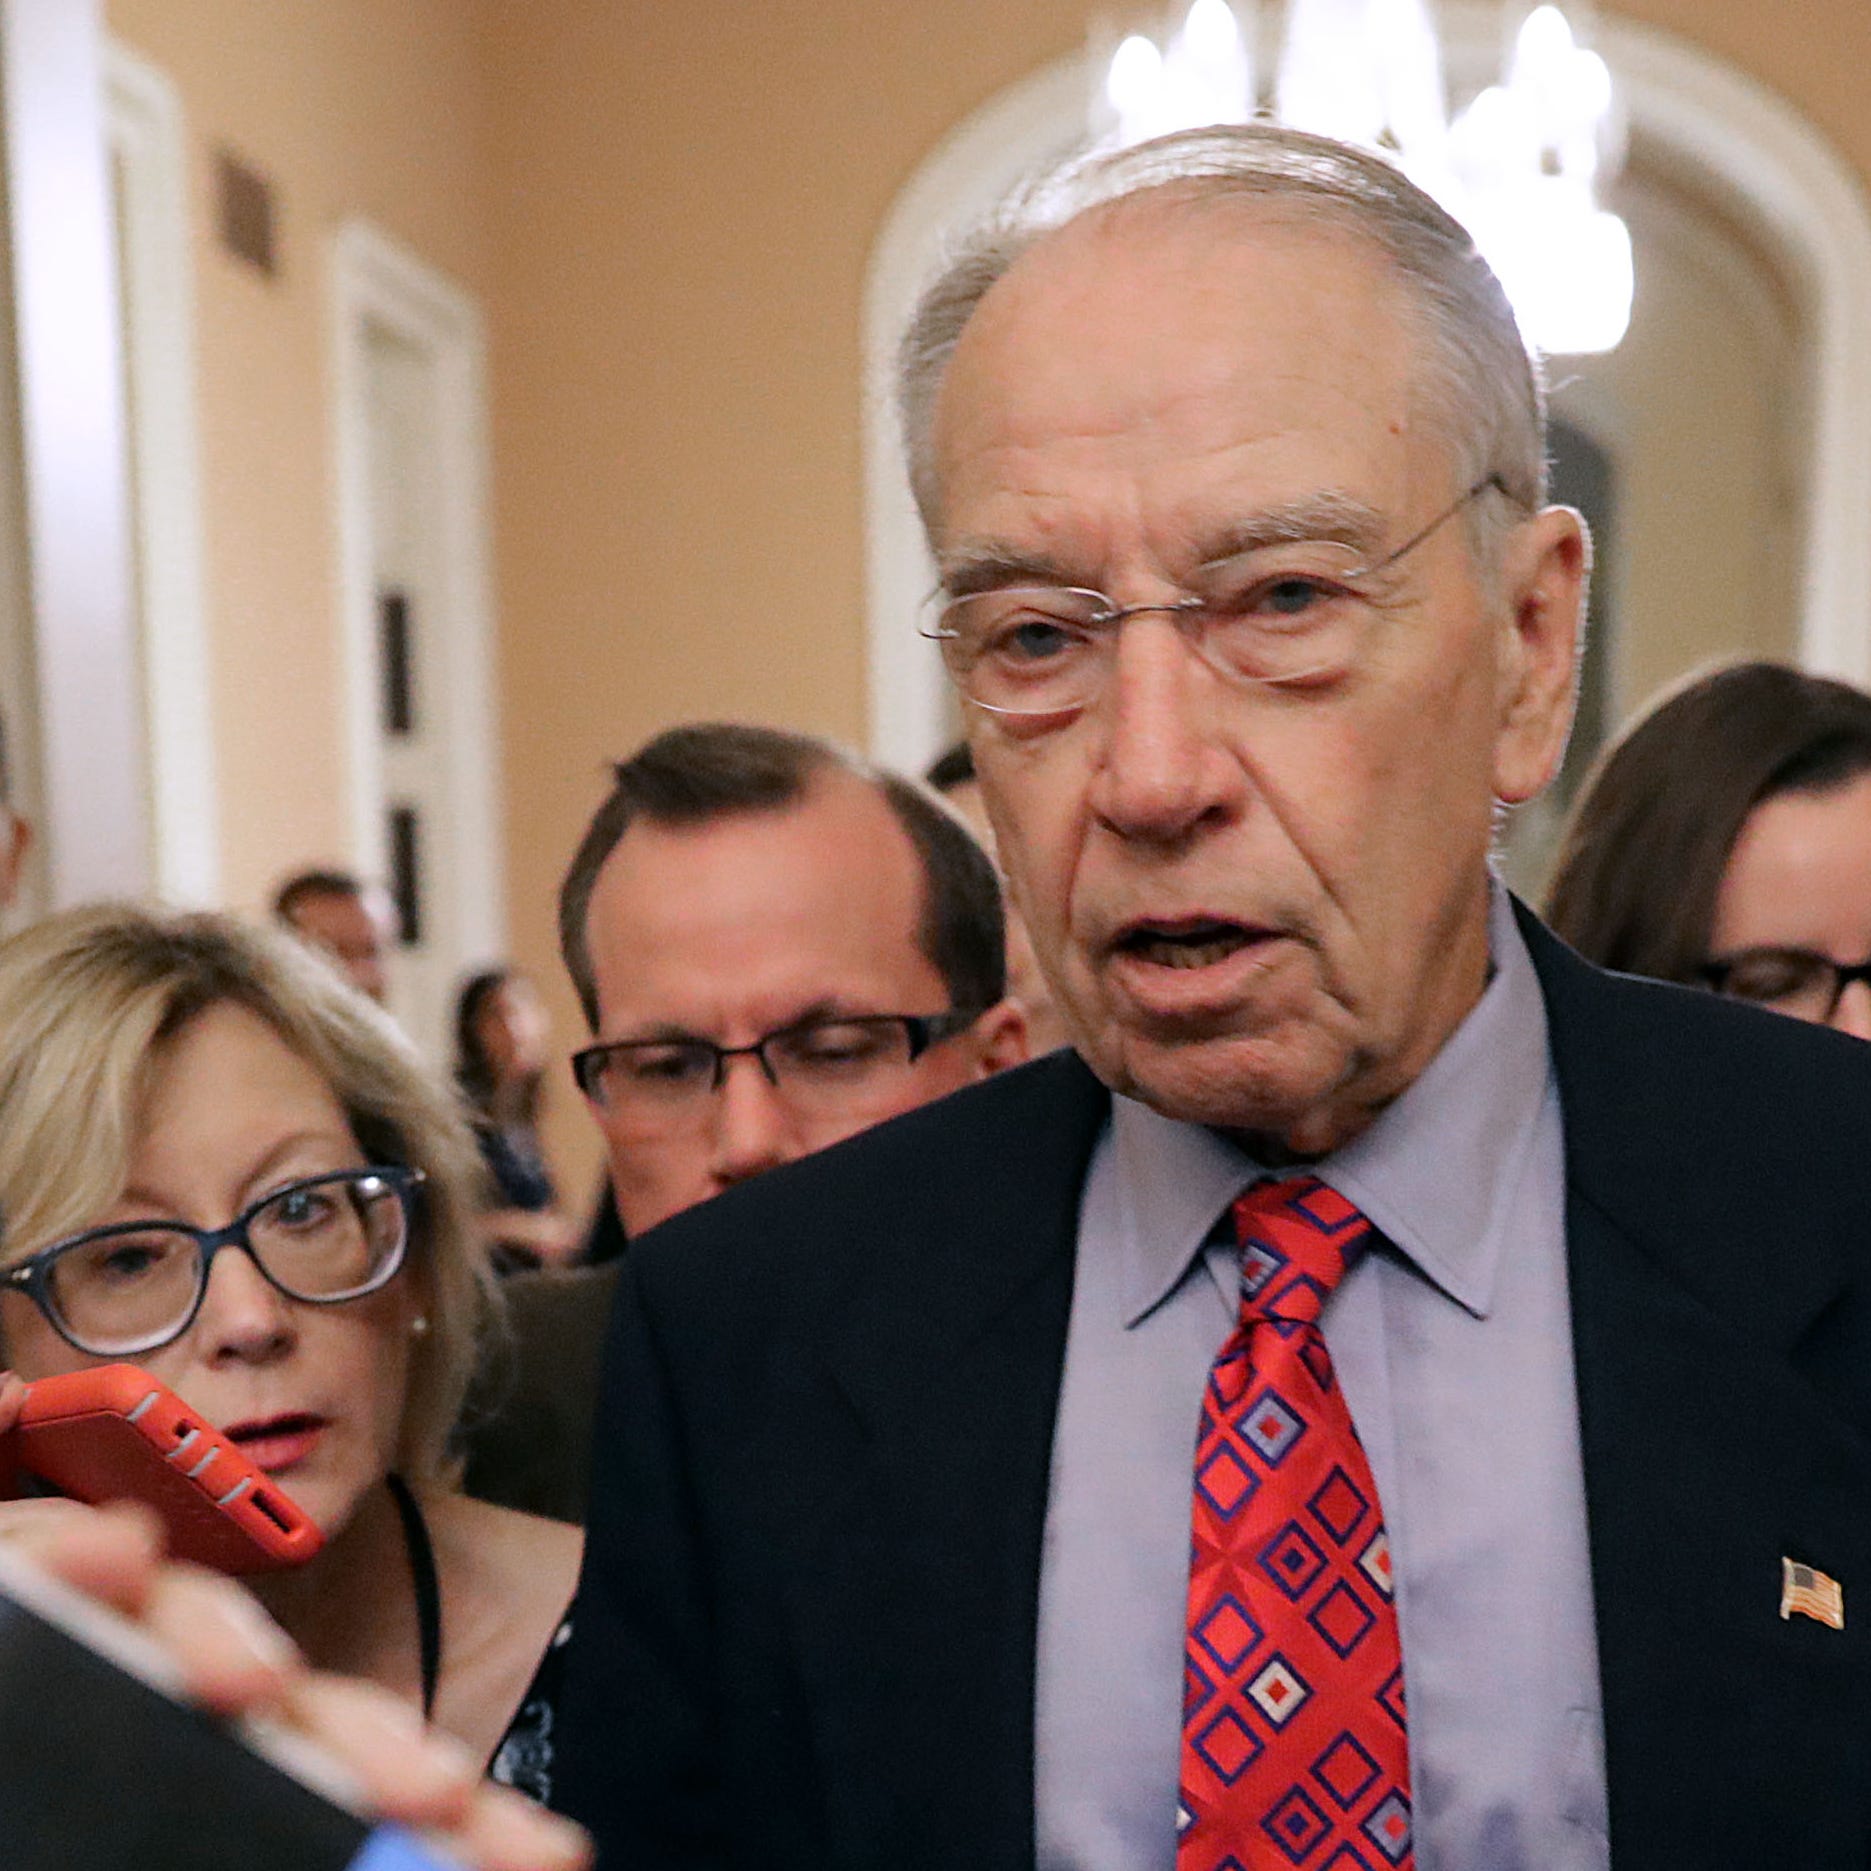 Senate Judiciary Committee Chairman Chuck Grassley, R-Iowa, speaks with reporters as he leaves a meeting in Senate Majority Leader Mitch McConnell's office at the U.S. Capitol on Tuesday.